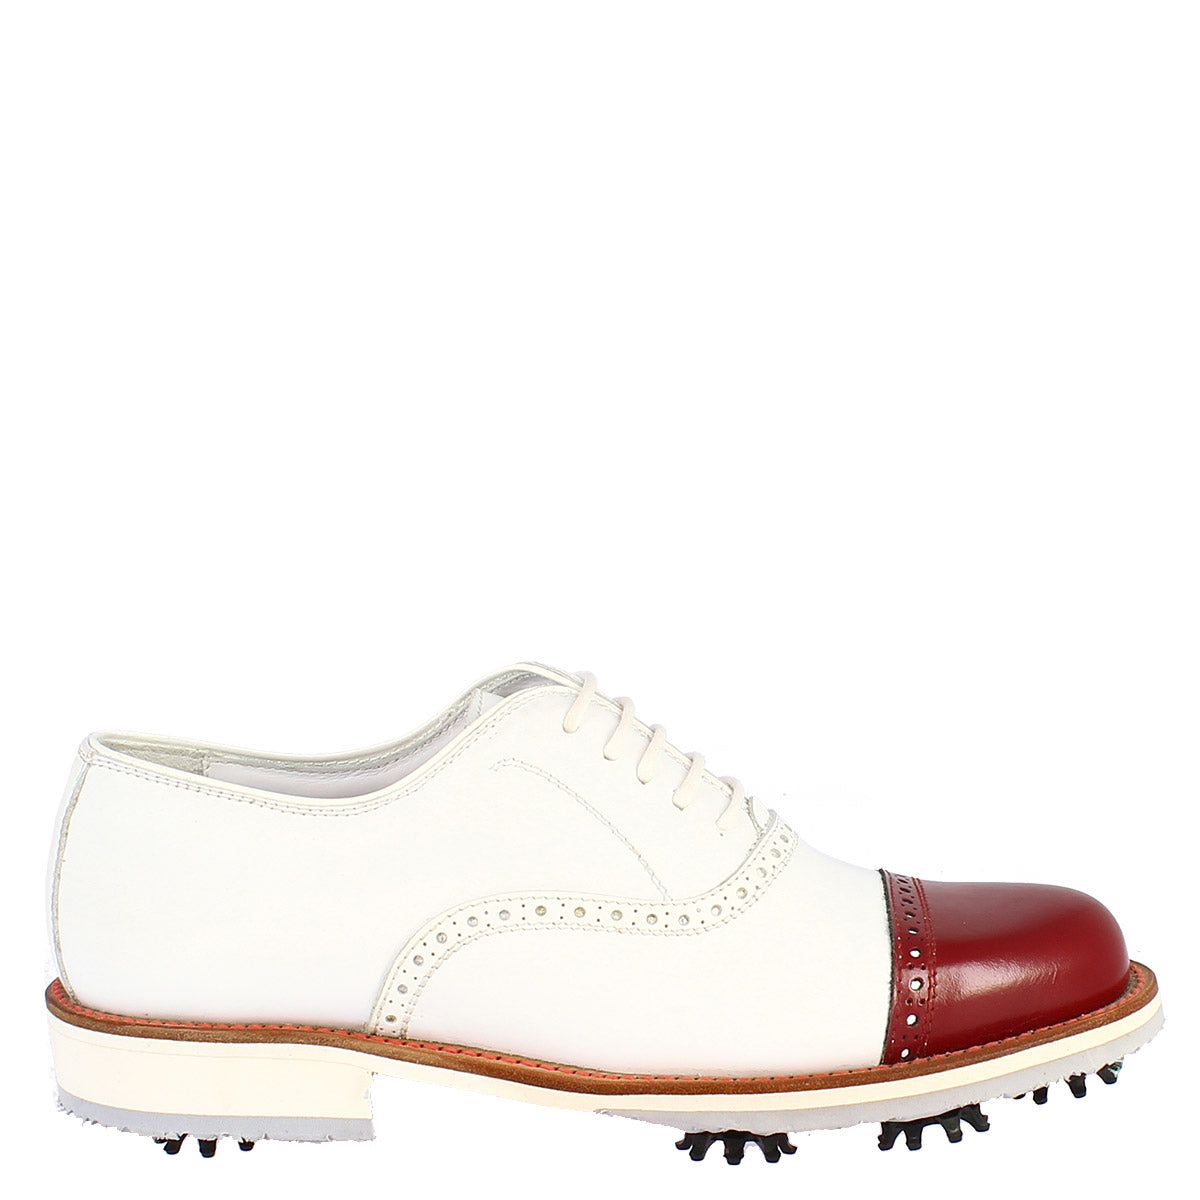 Handmade men's golf shoes in white leather with red tip